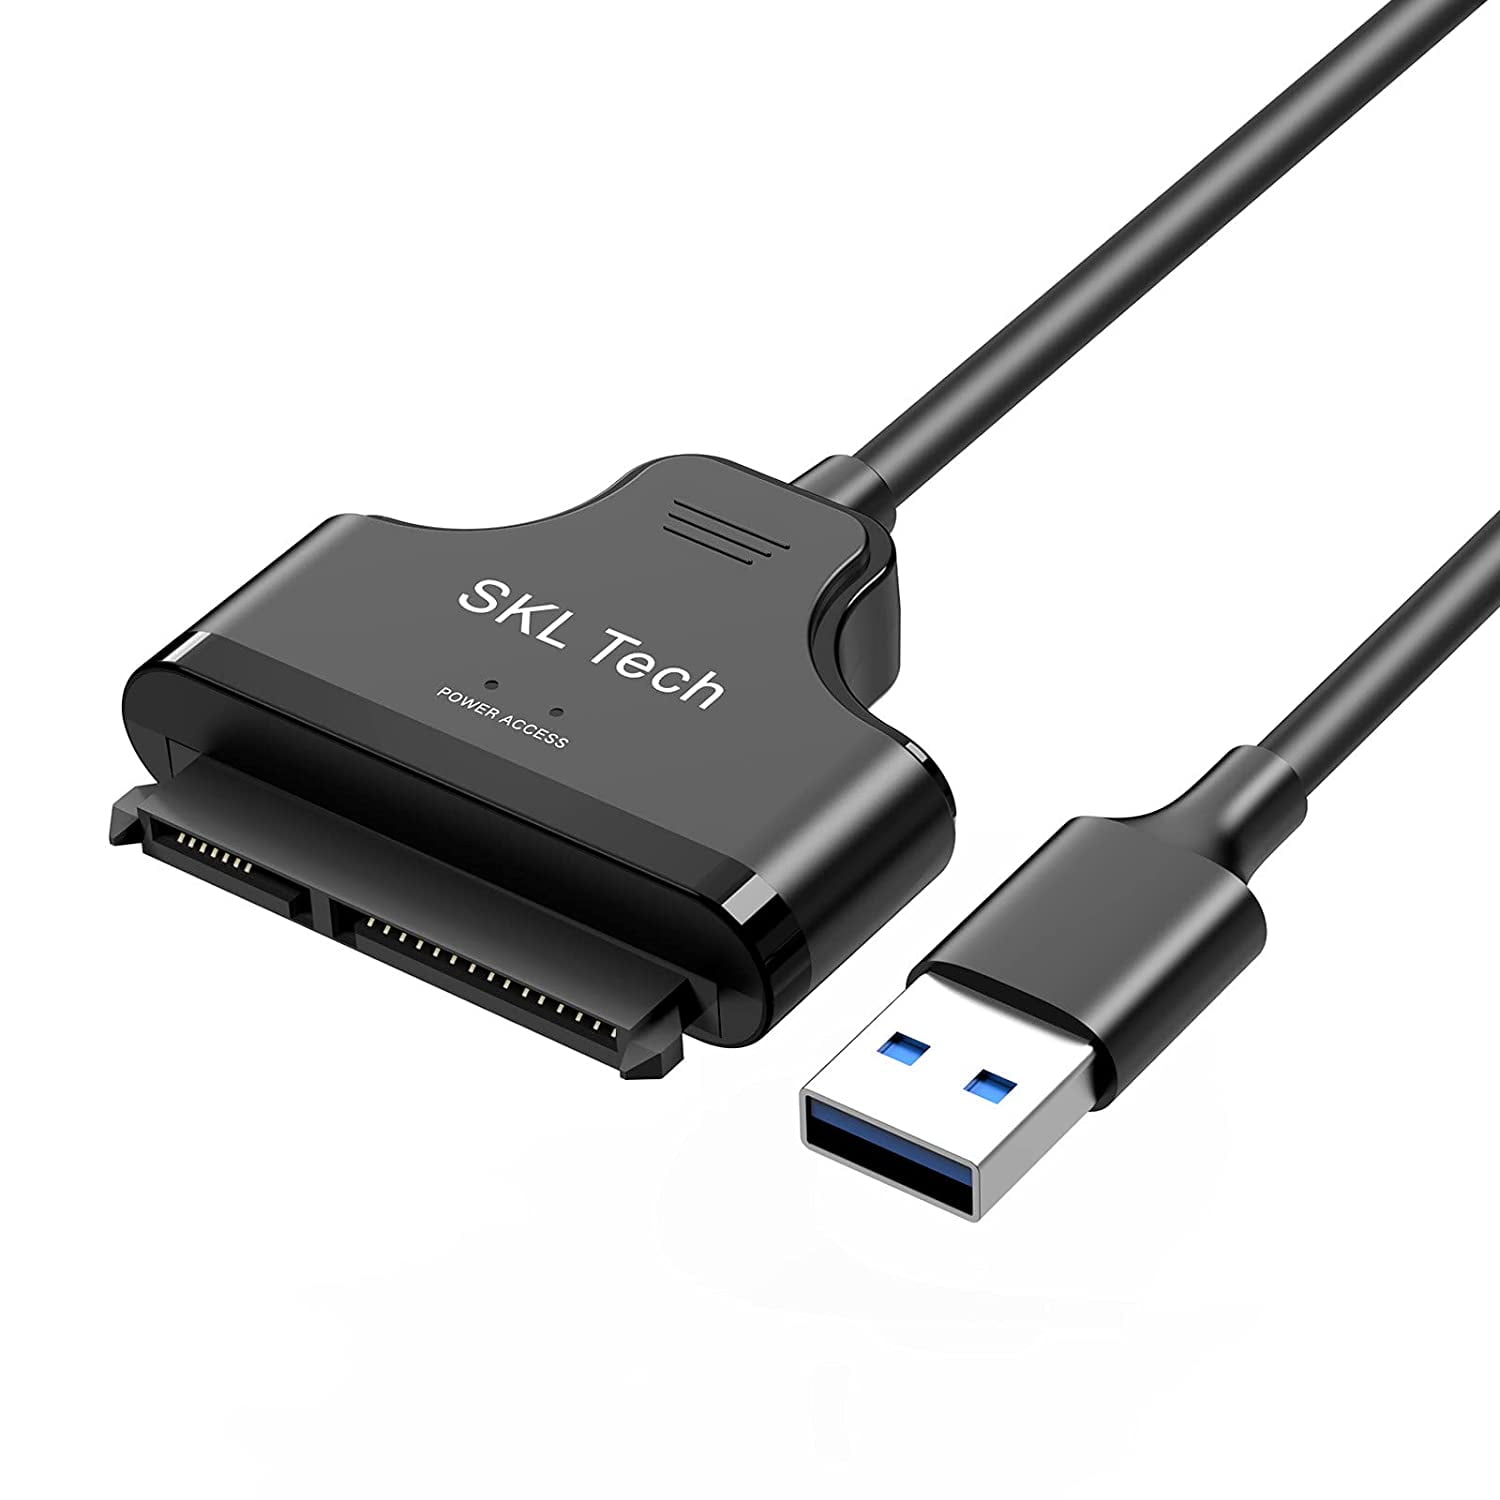 USB 3.0 SATA III Drive Adapter Cable, SATA to USB Adapter Cable for 2.5 & HDD, Support UASP, 9 inch, Black… - Walmart.com